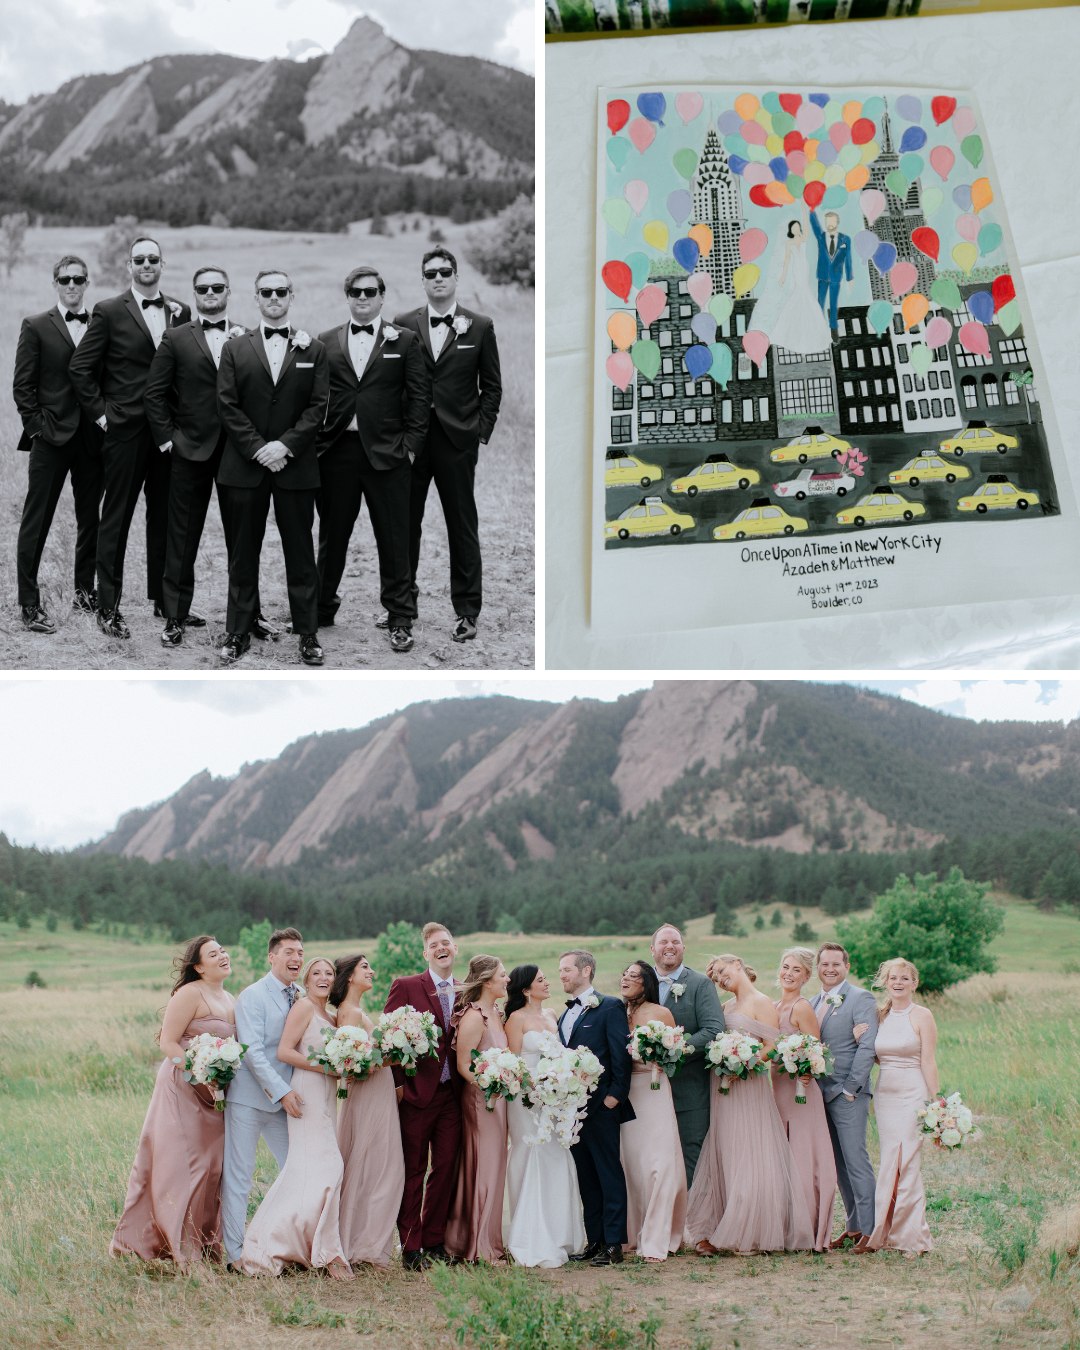 groomsmen at Flat Iron, couple's custom guest book, bride tribe and couple pose